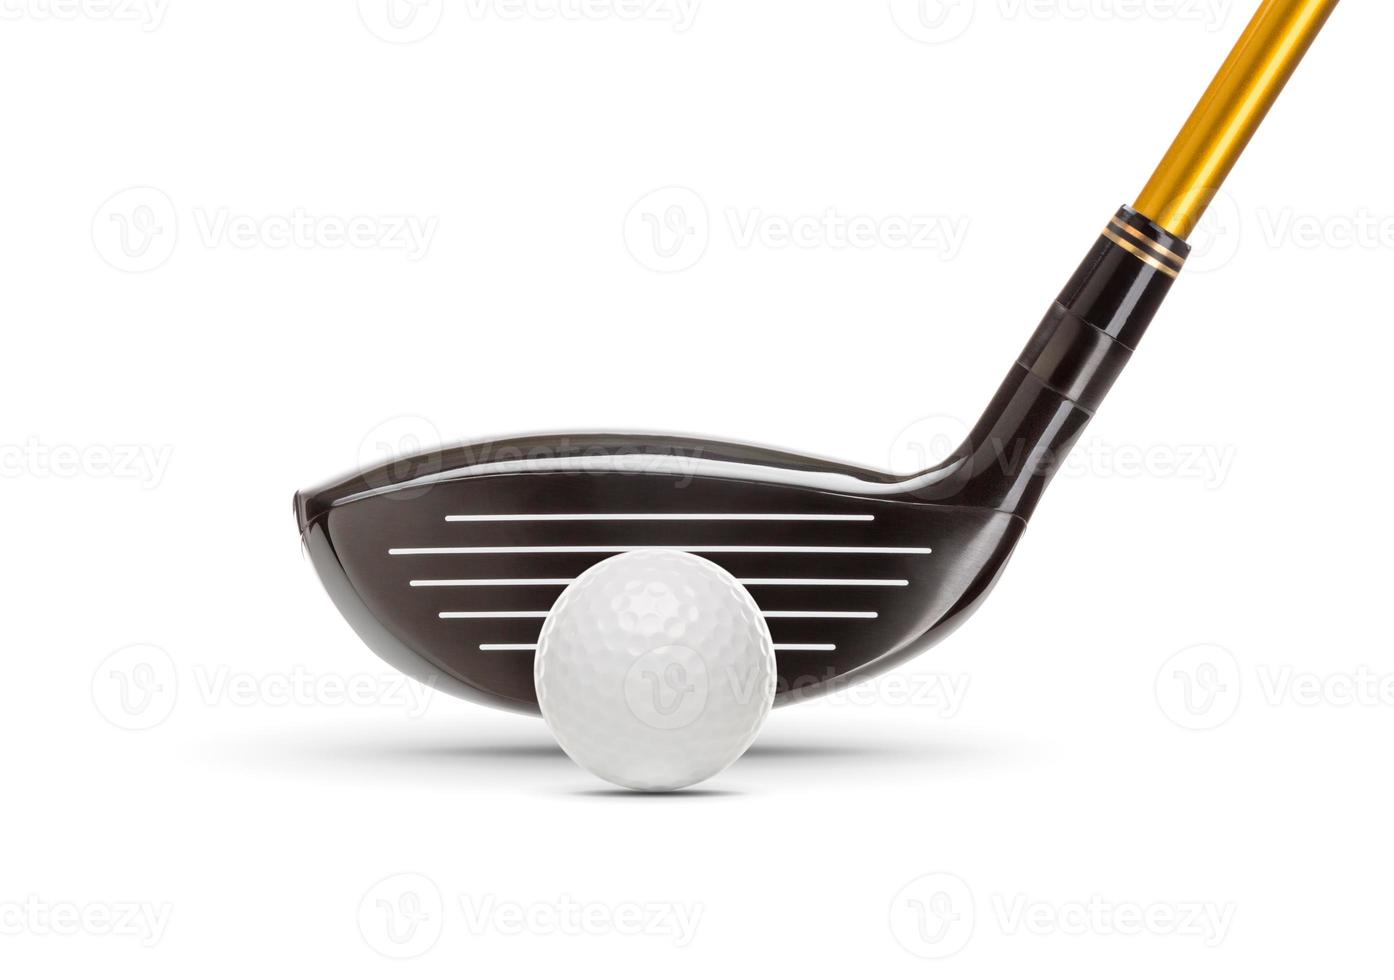 Fairway Wood Golf Club and Golf Ball on White Background photo